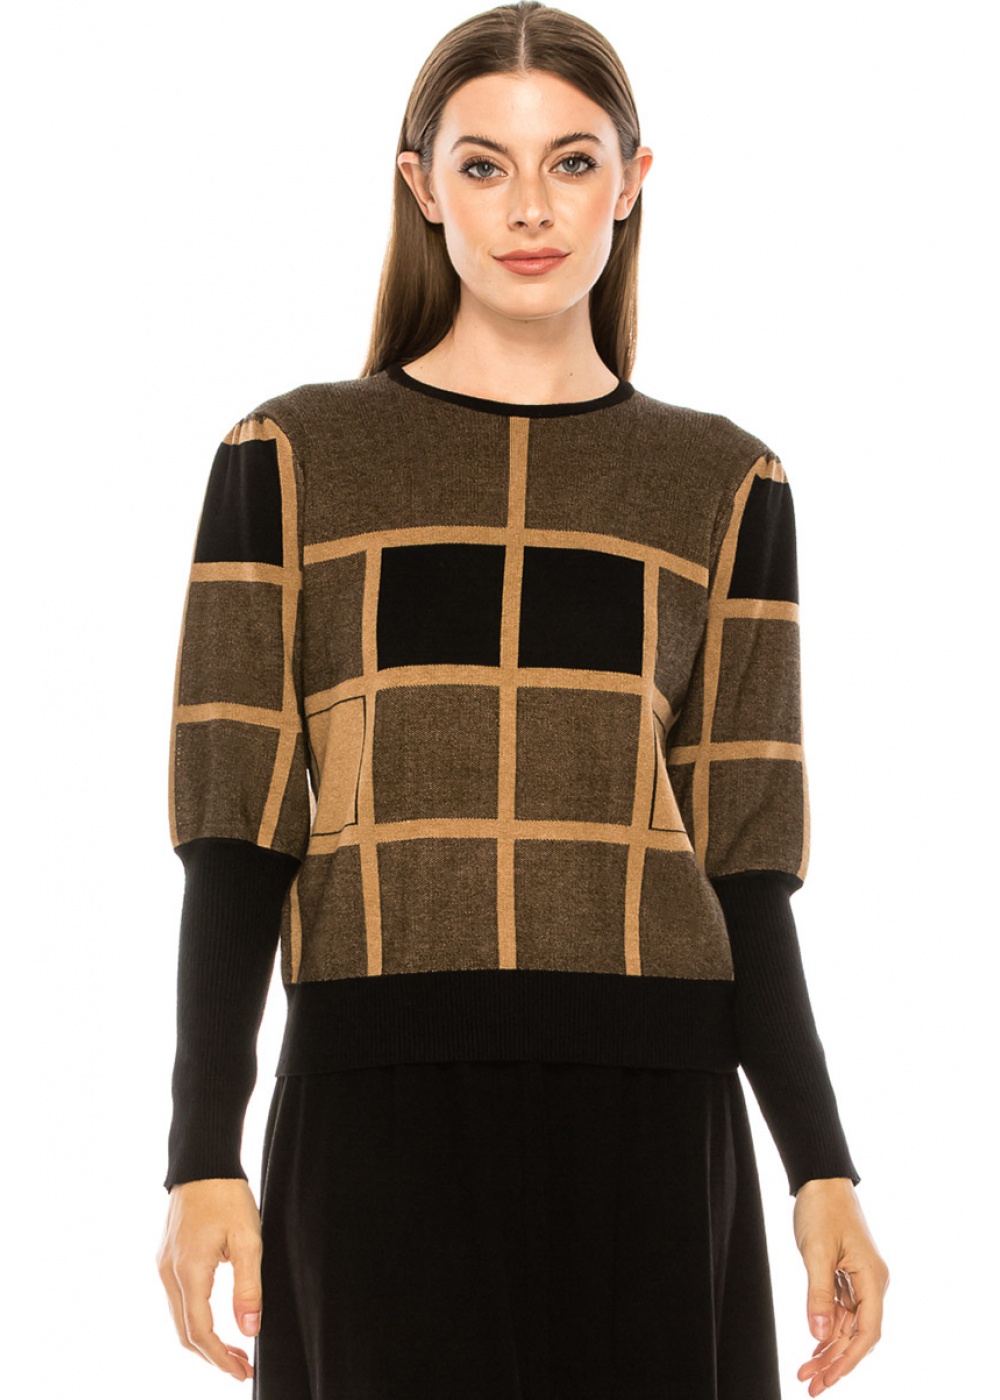 Checkered sweater with voluminous sleeves